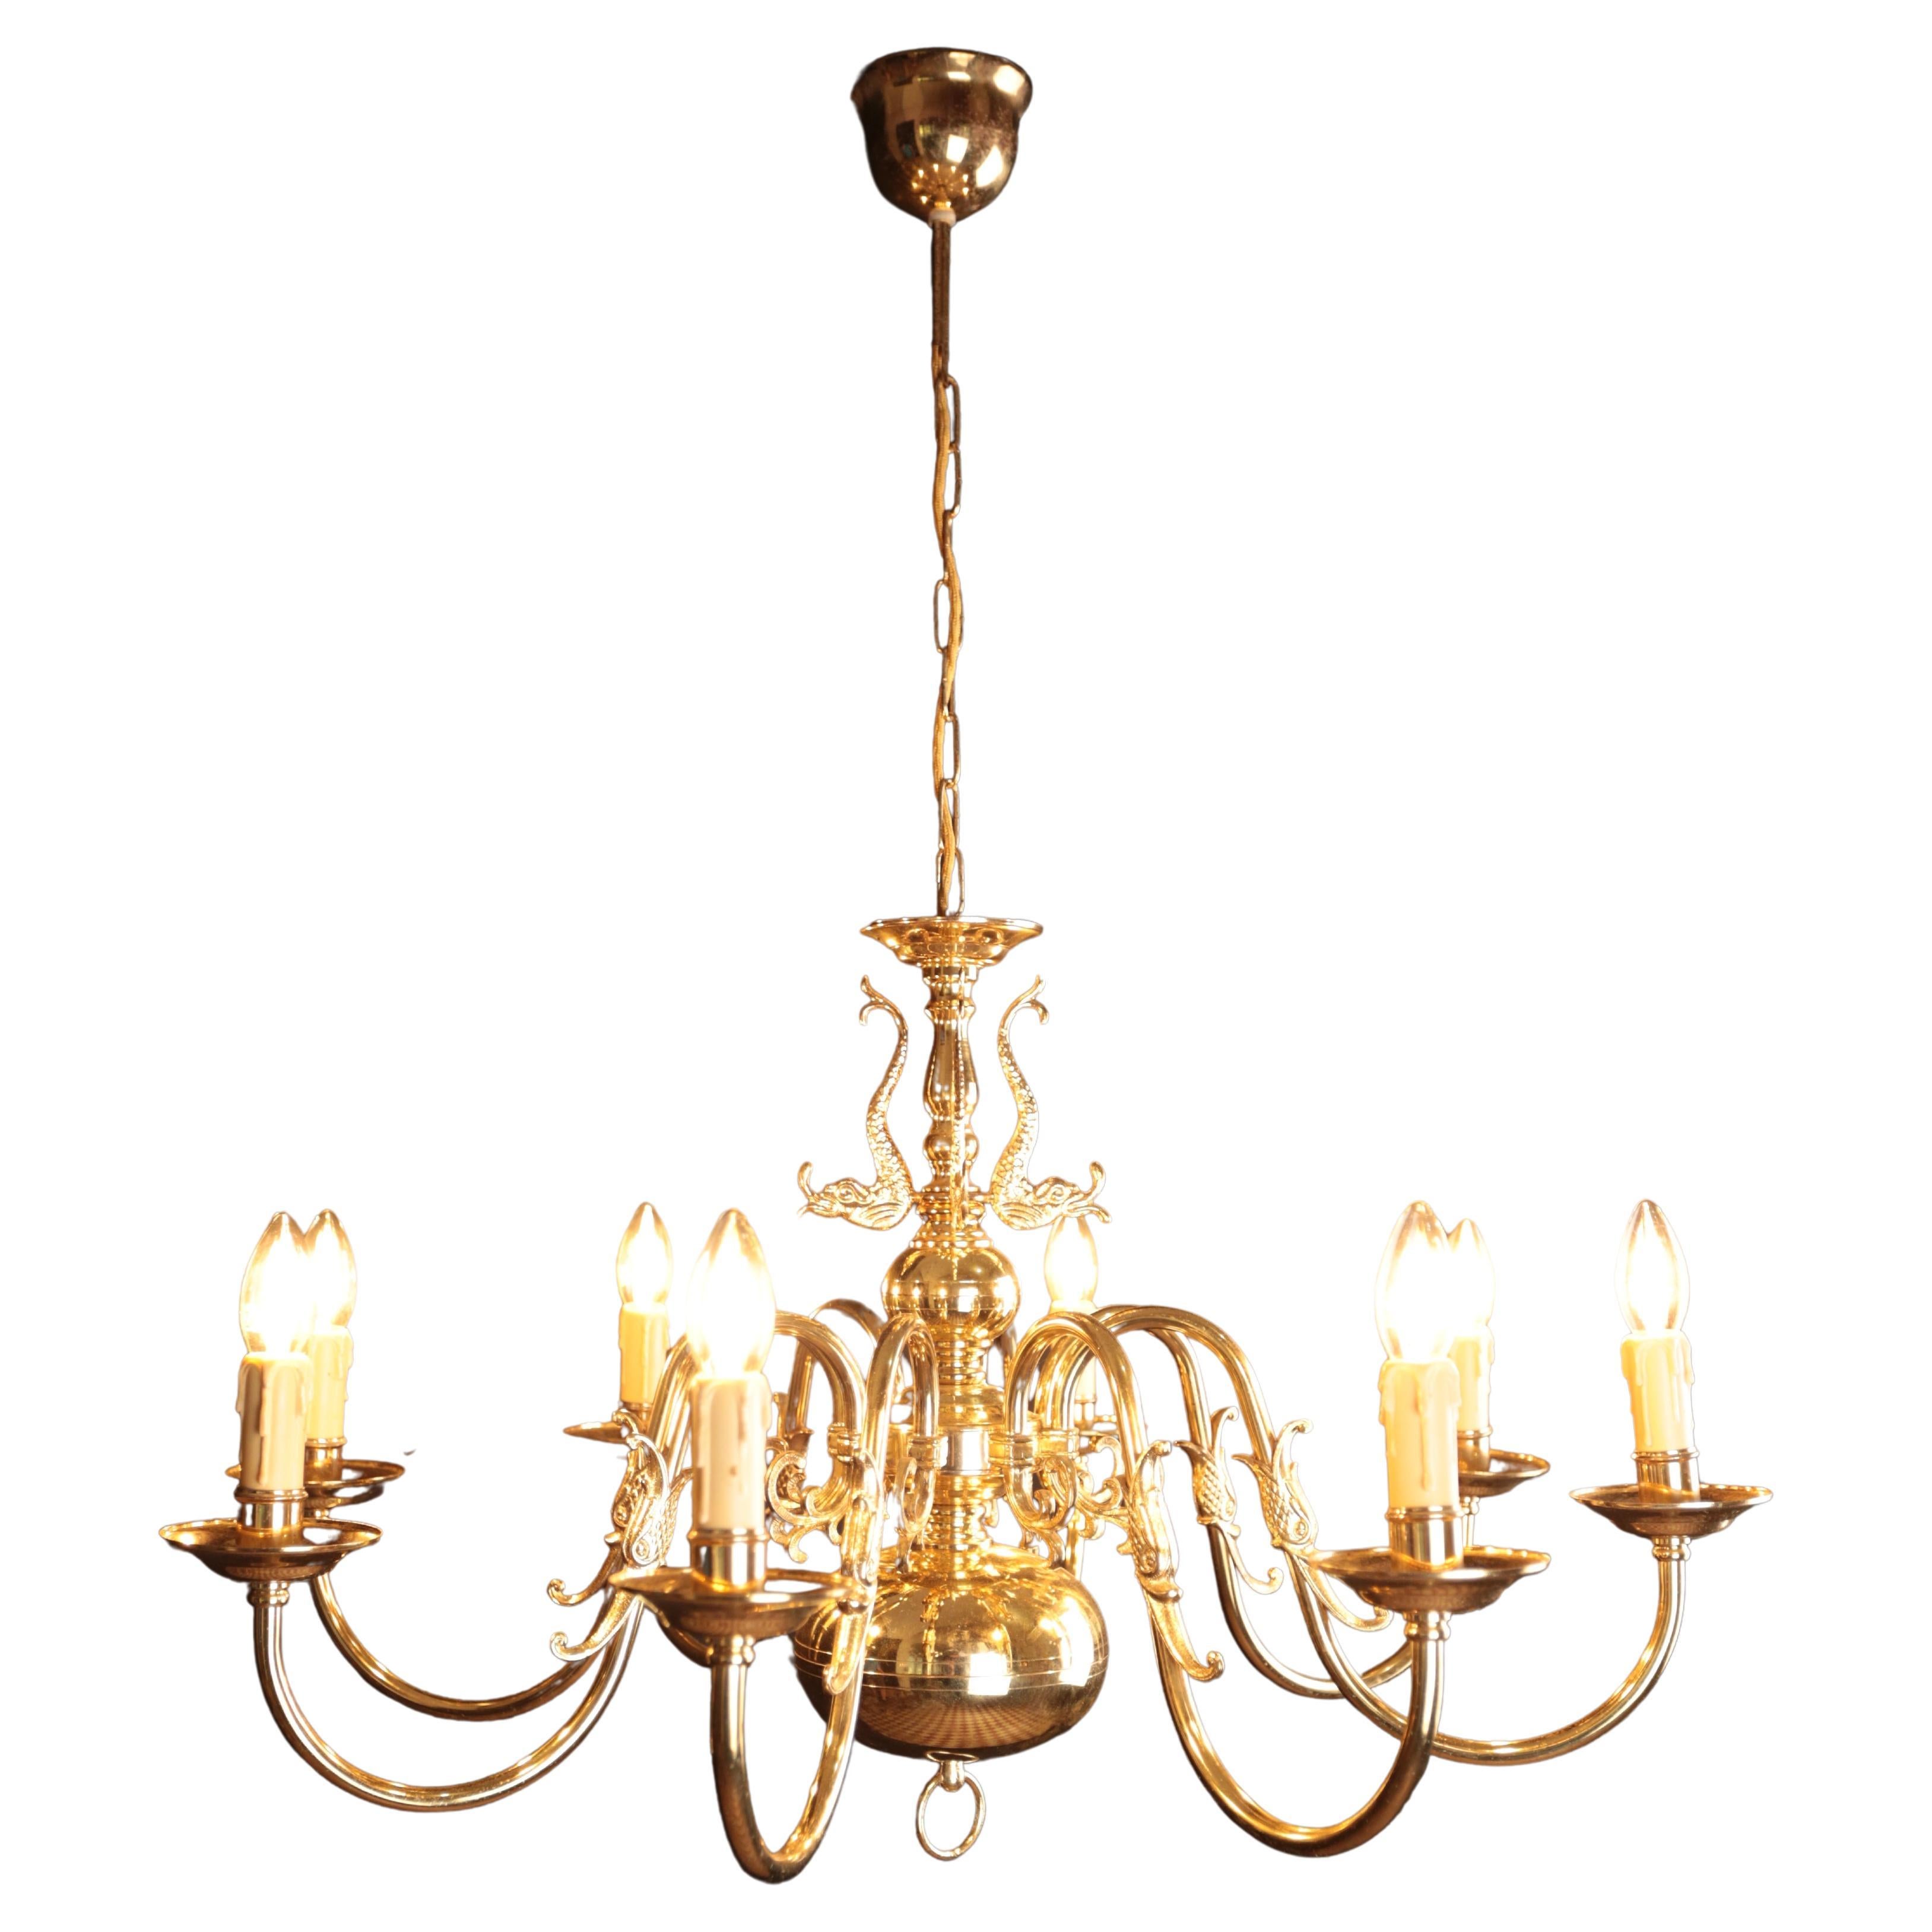 Eight-armed Flemish chandelier. Functional For Sale